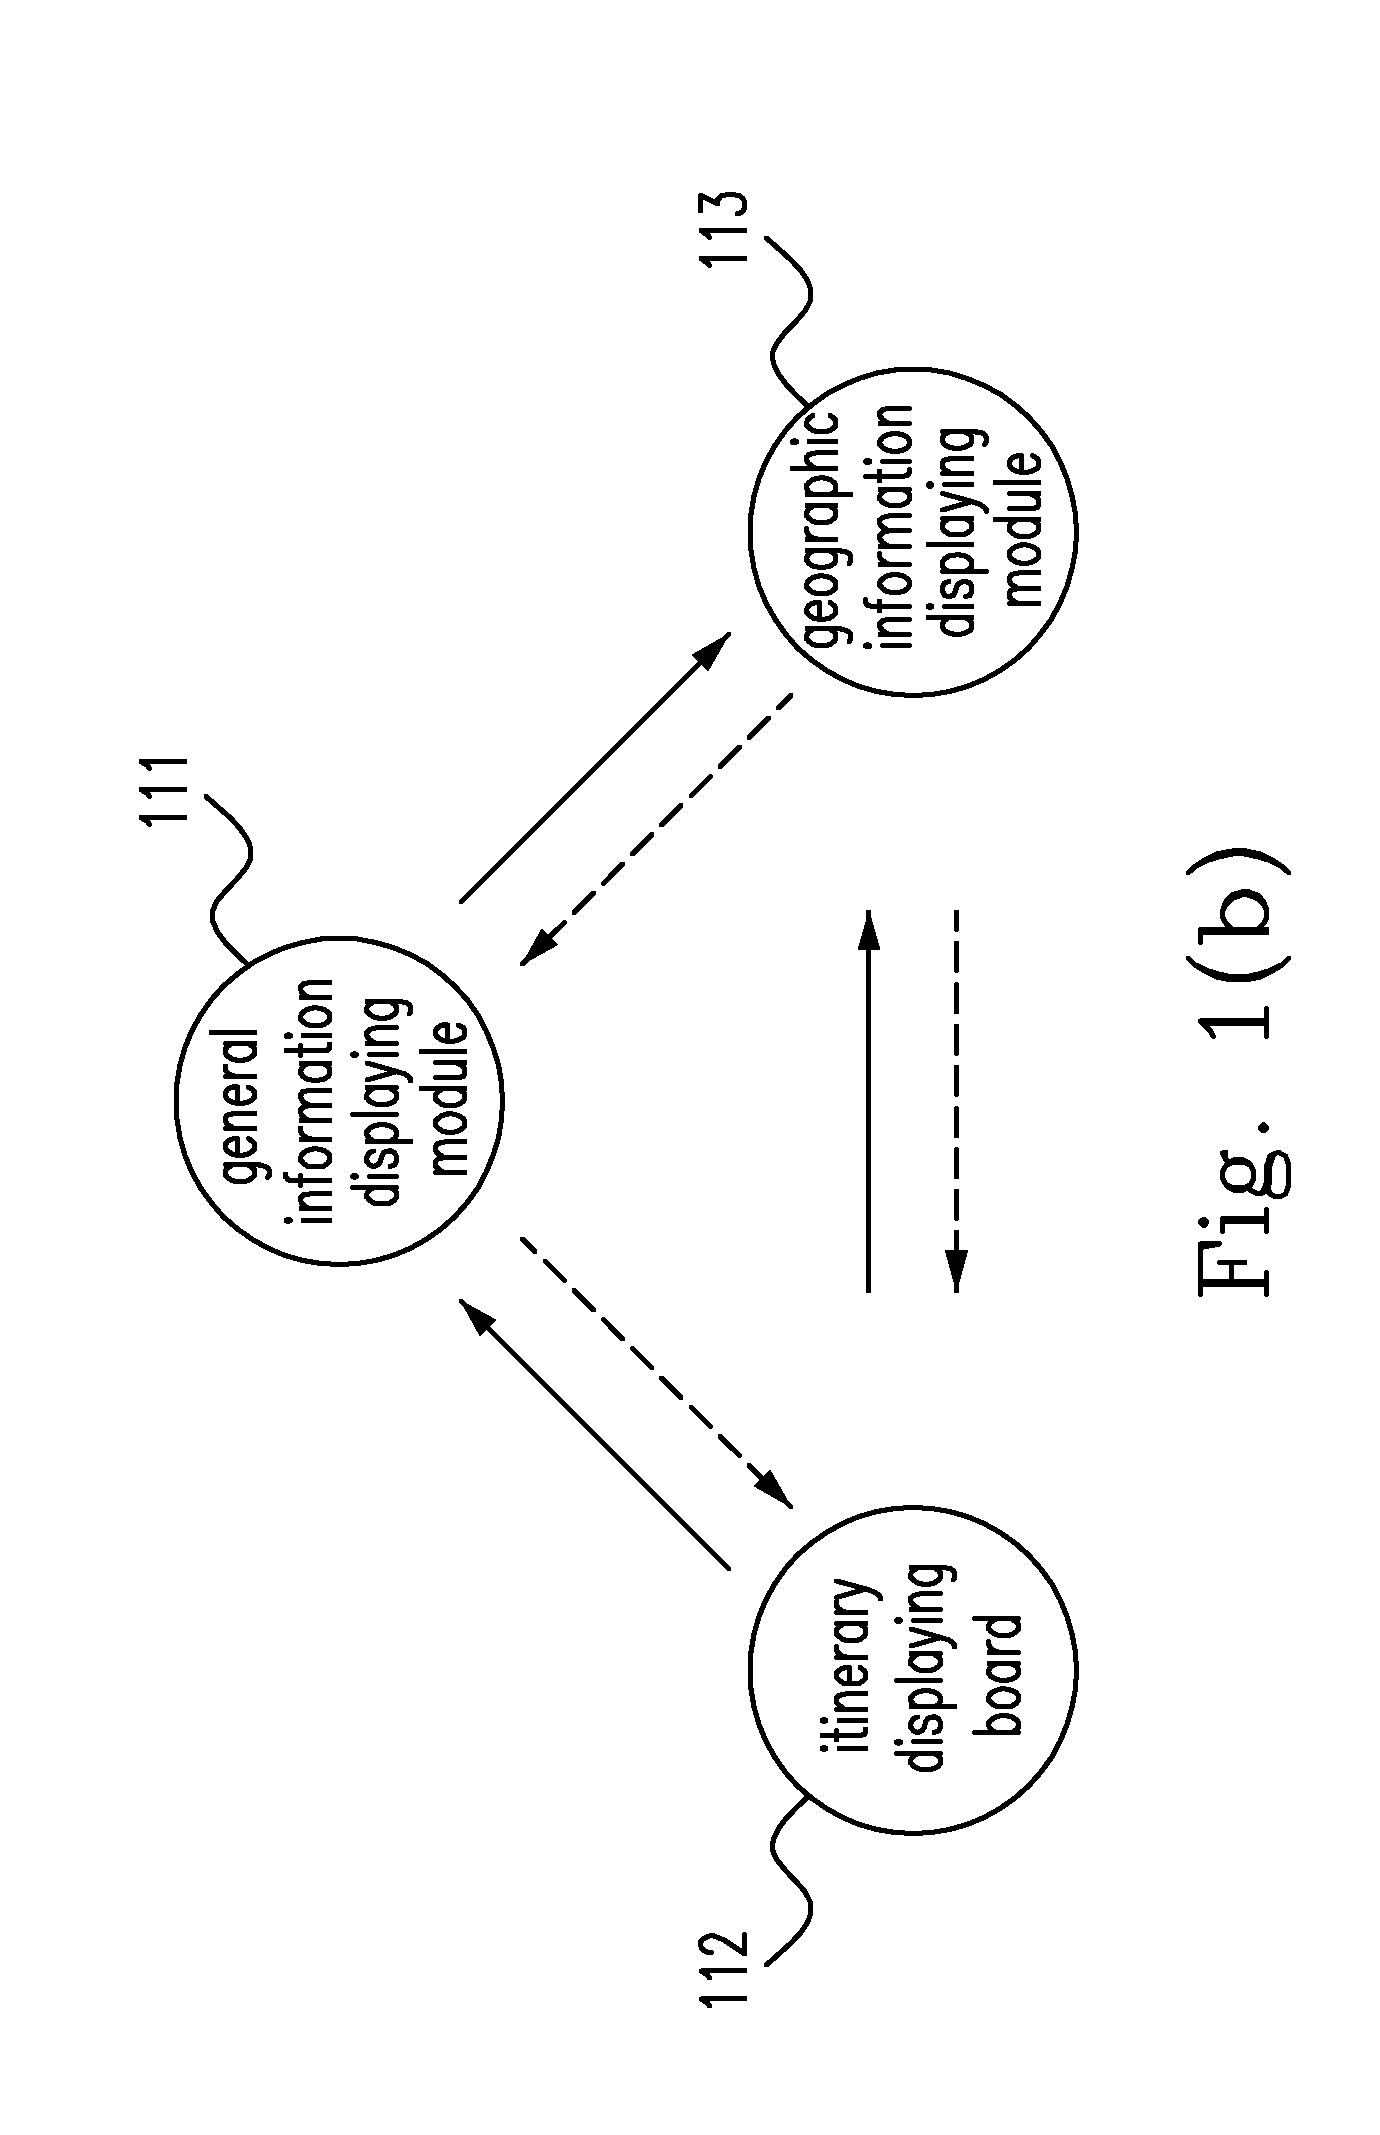 Itinerary Planning System and Method Thereof